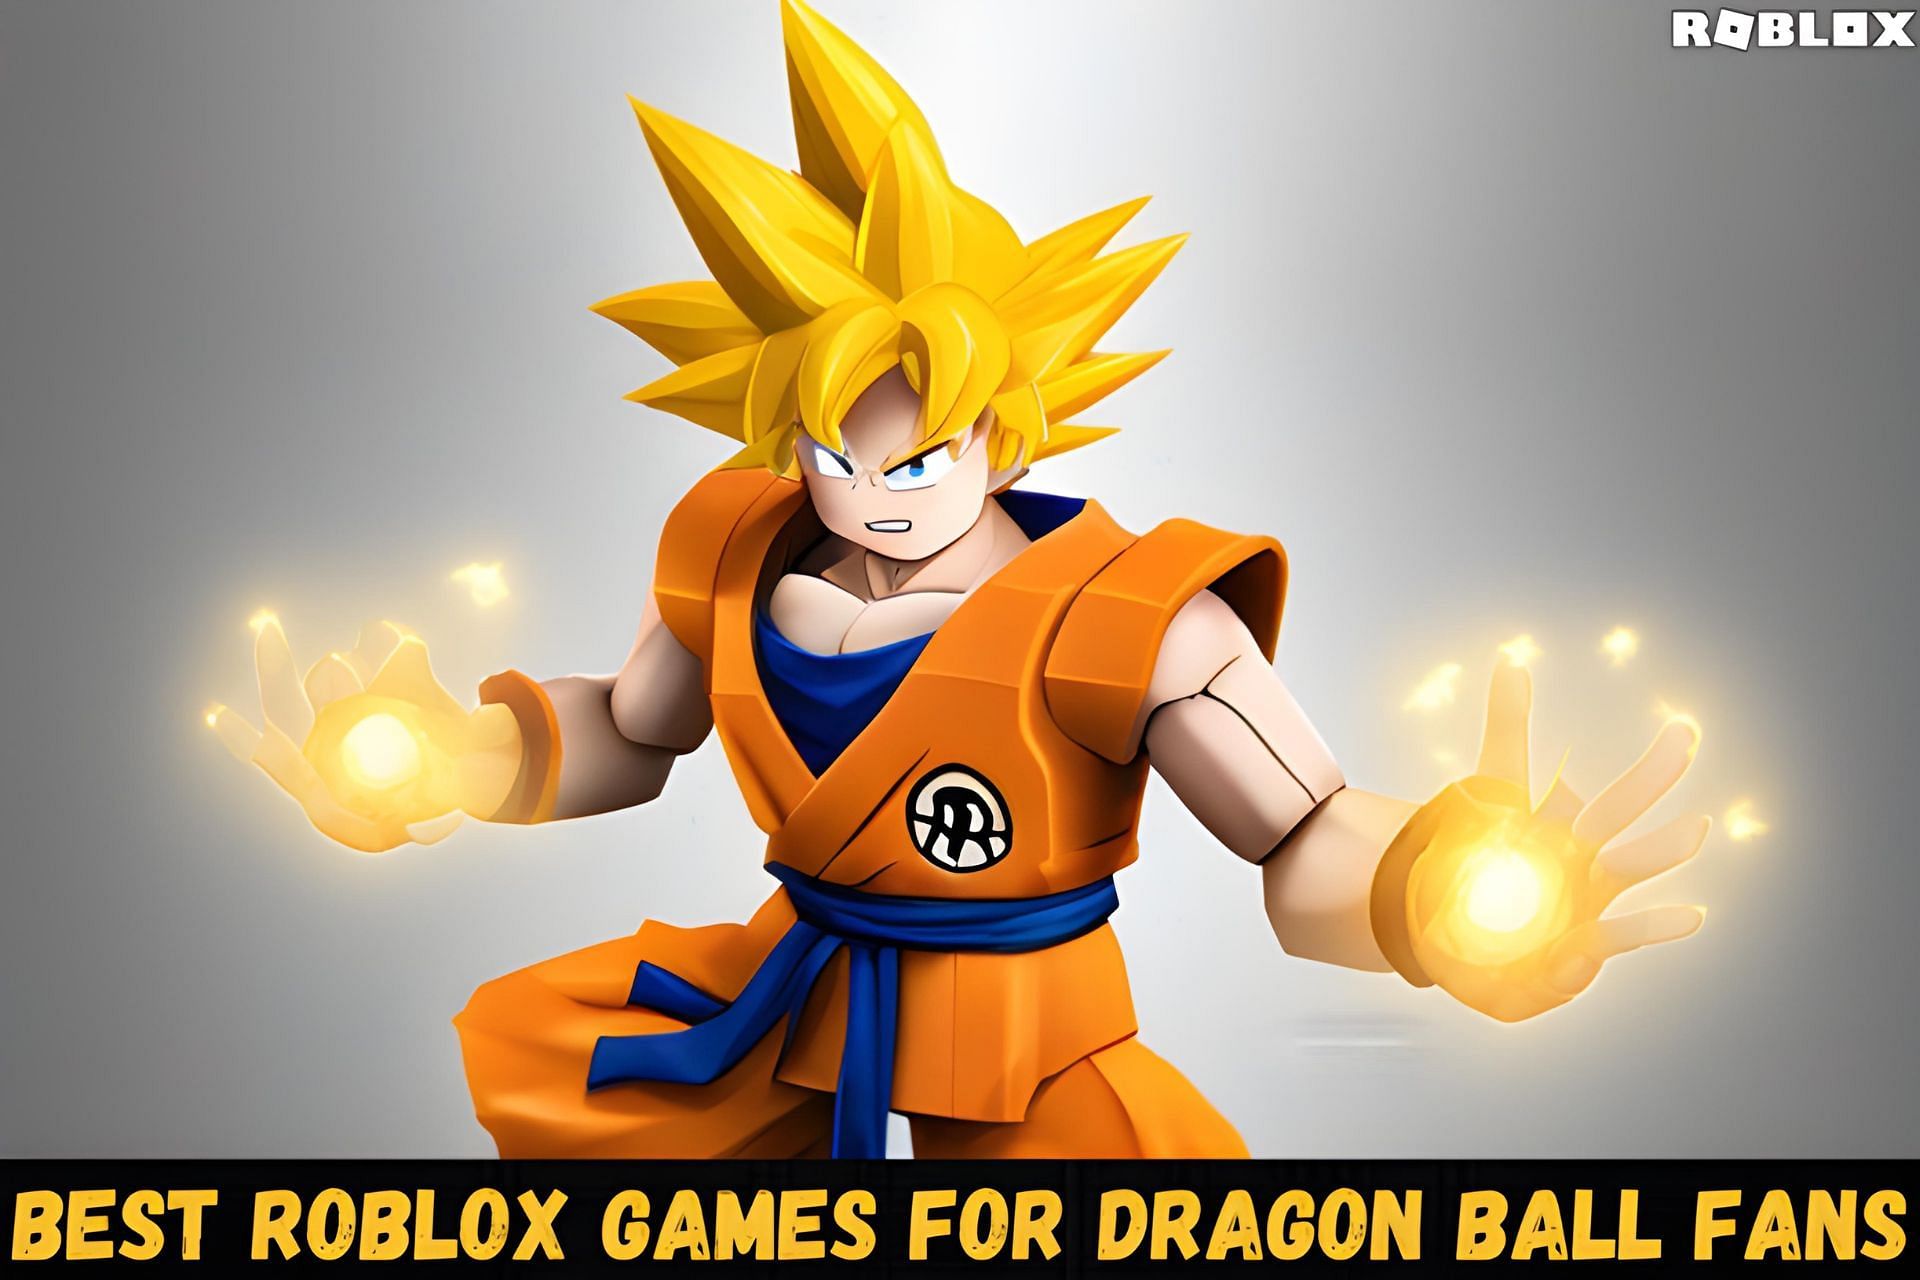 Play your favorite DBZ game (Image via Roblox)